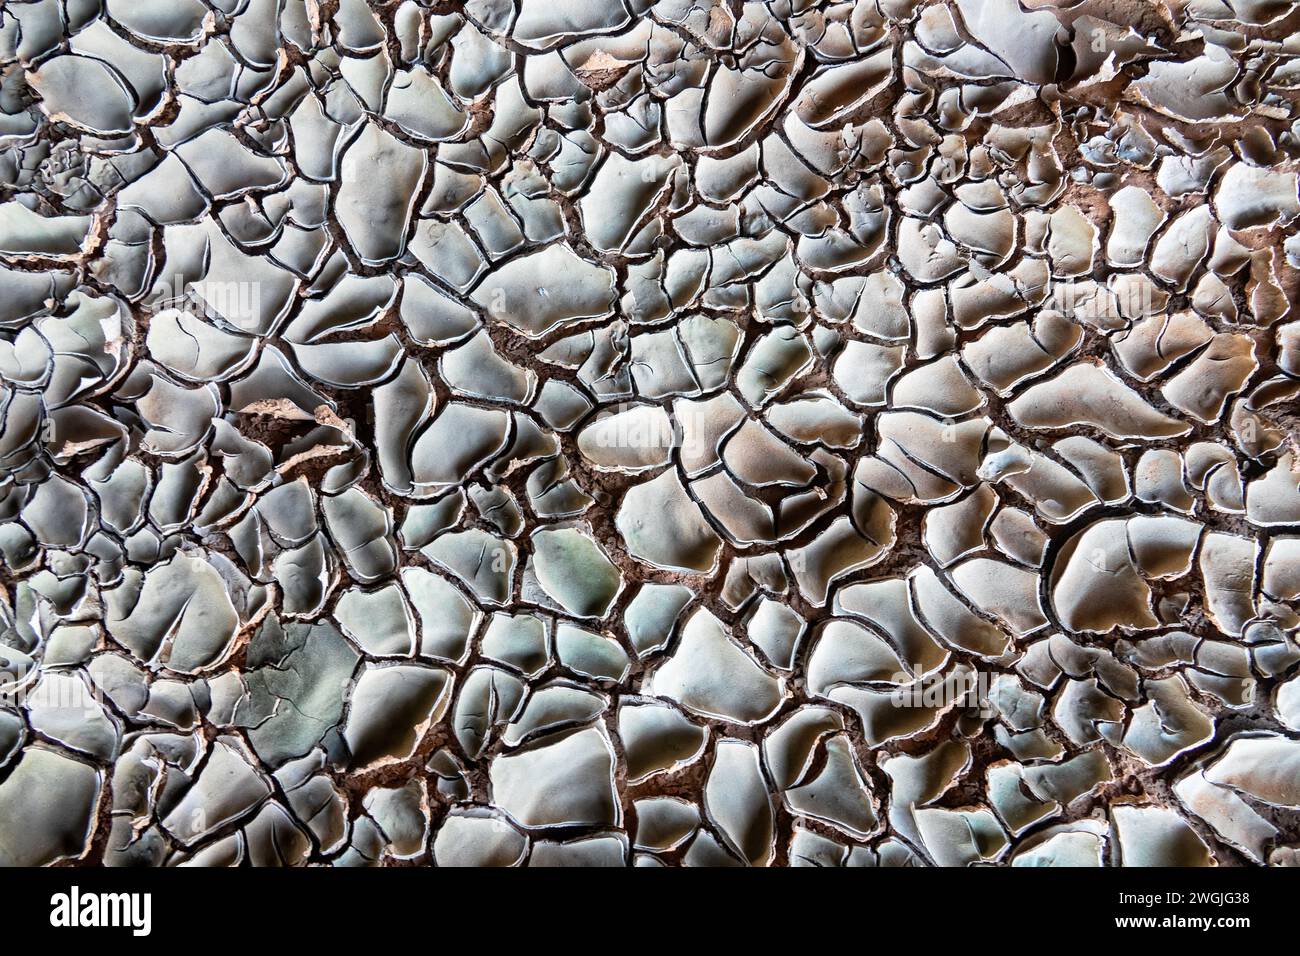 The dissected background resembles shiny, cracked oil-covered soil, fracturing surface, chapped ground, desert varnish. Crocodile leather-alligator hi Stock Photo